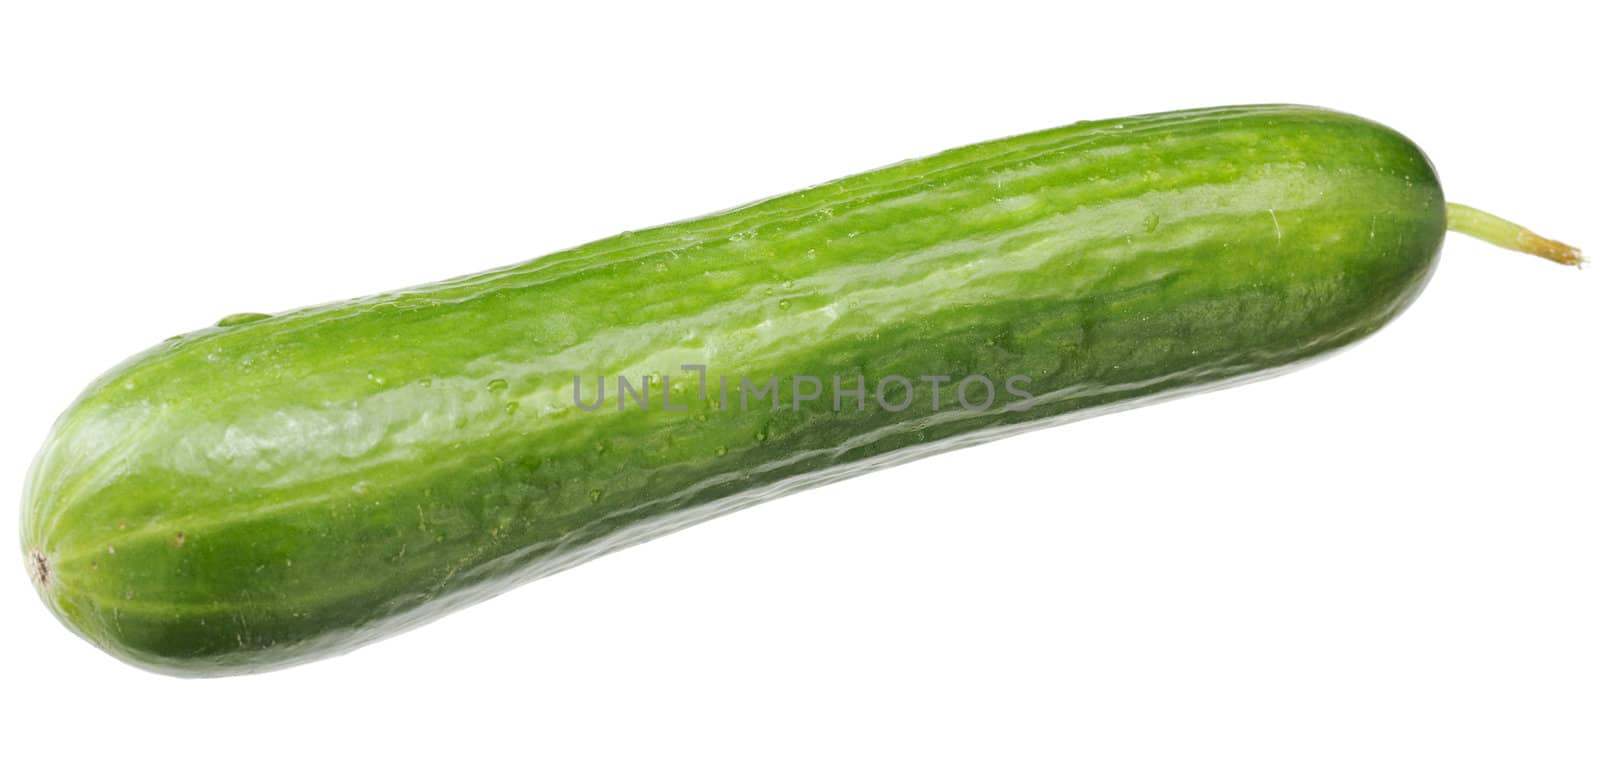 A green fresh cucumber with a sticking out sprig by pzaxe